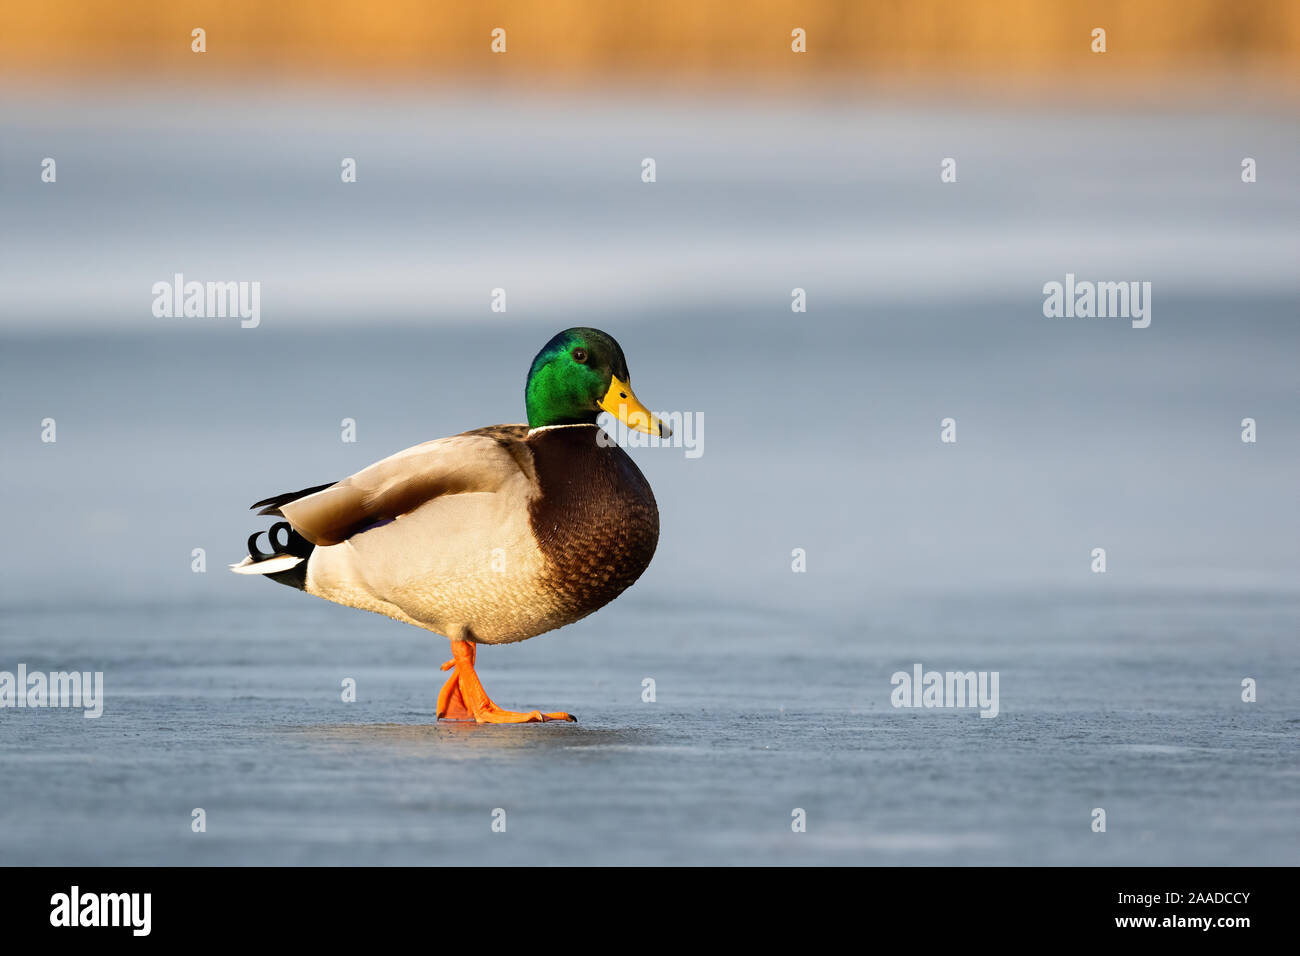 Curious male wild duck standing on frosty pond in wintertime with copy space. Stock Photo